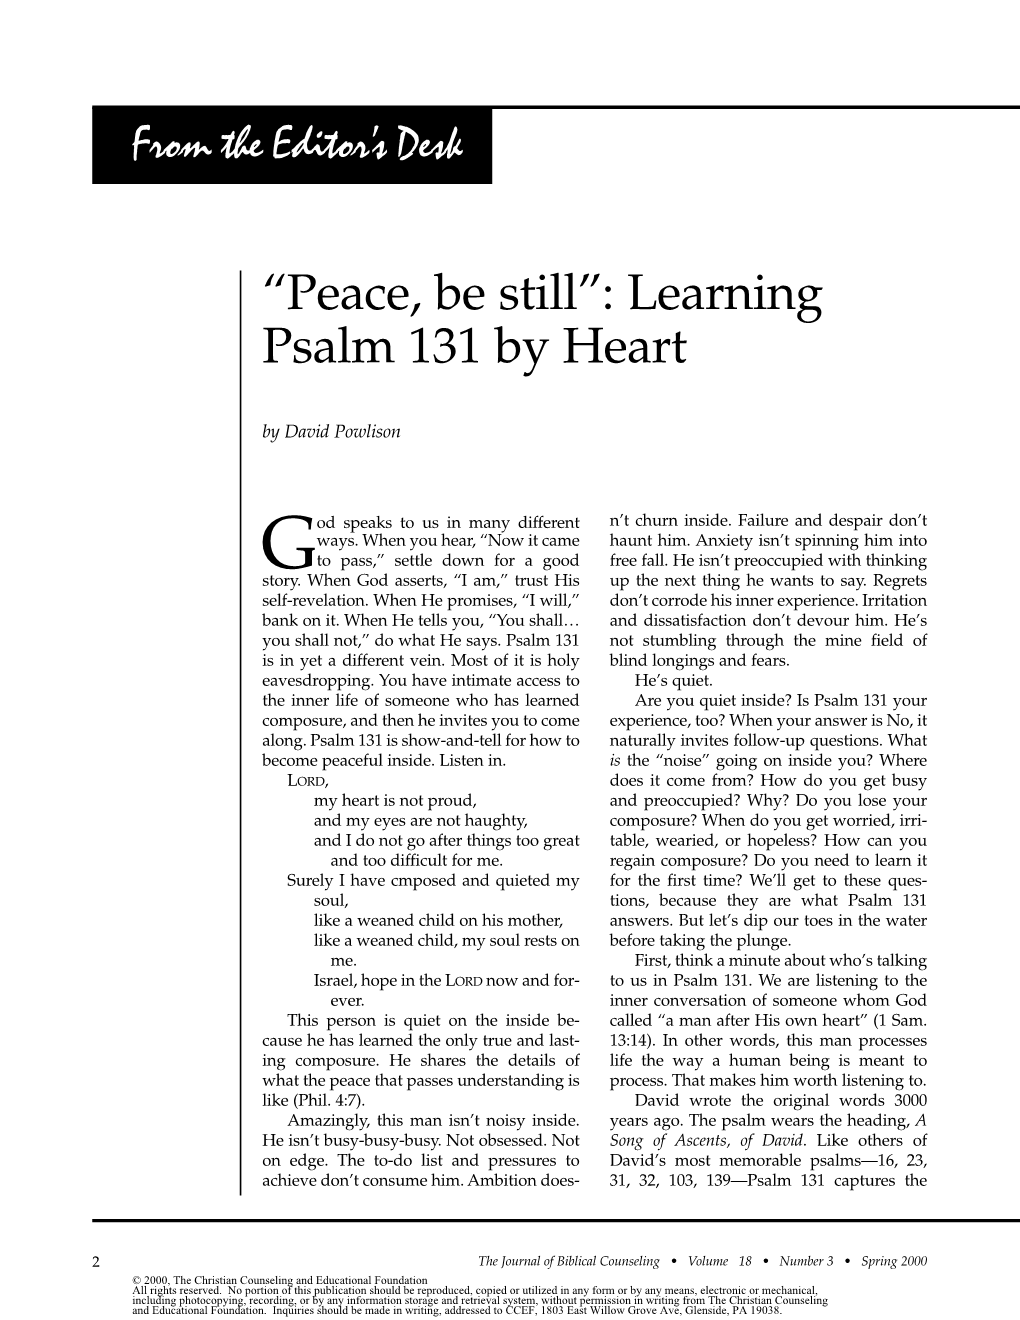 Peace, Be Still: Learning Psalm 131 by Heart